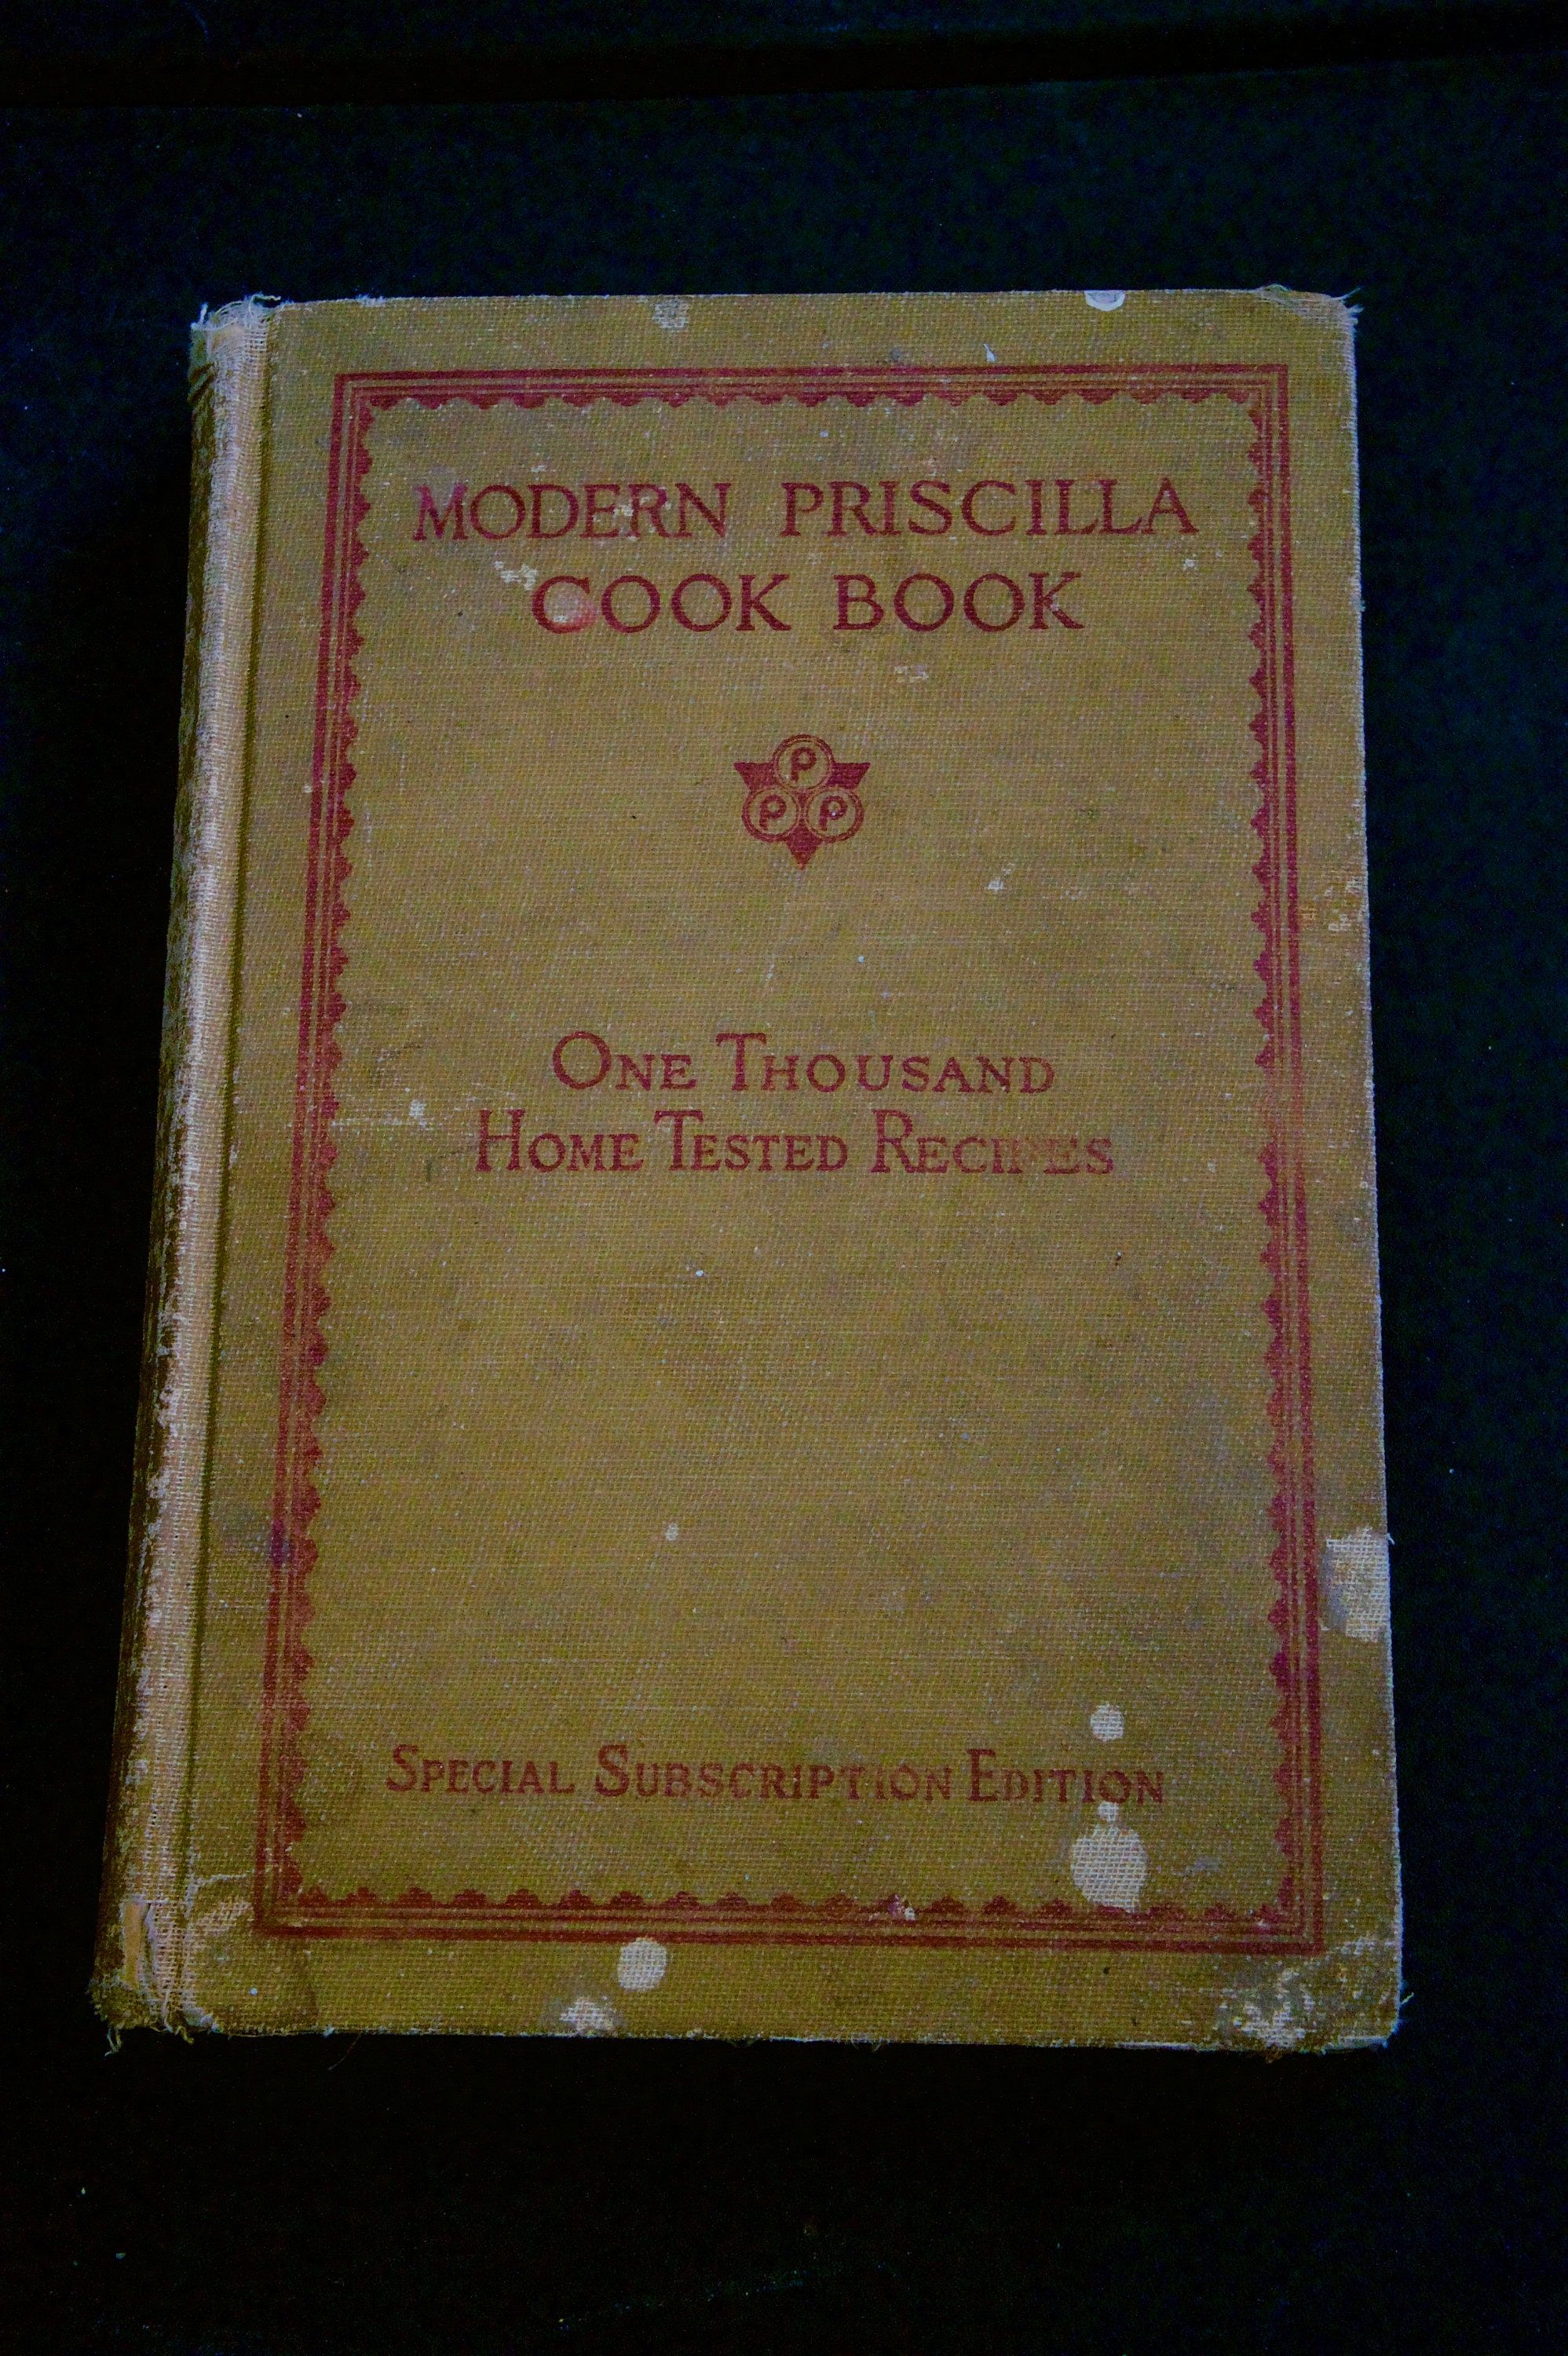 VOGUE BOOK OF MENUS AND RECIPES FOR ENTERTAINING AT HOME by Daves, Jessica:  Very Good+ Hardcover (1964) First Edition; First Printing.